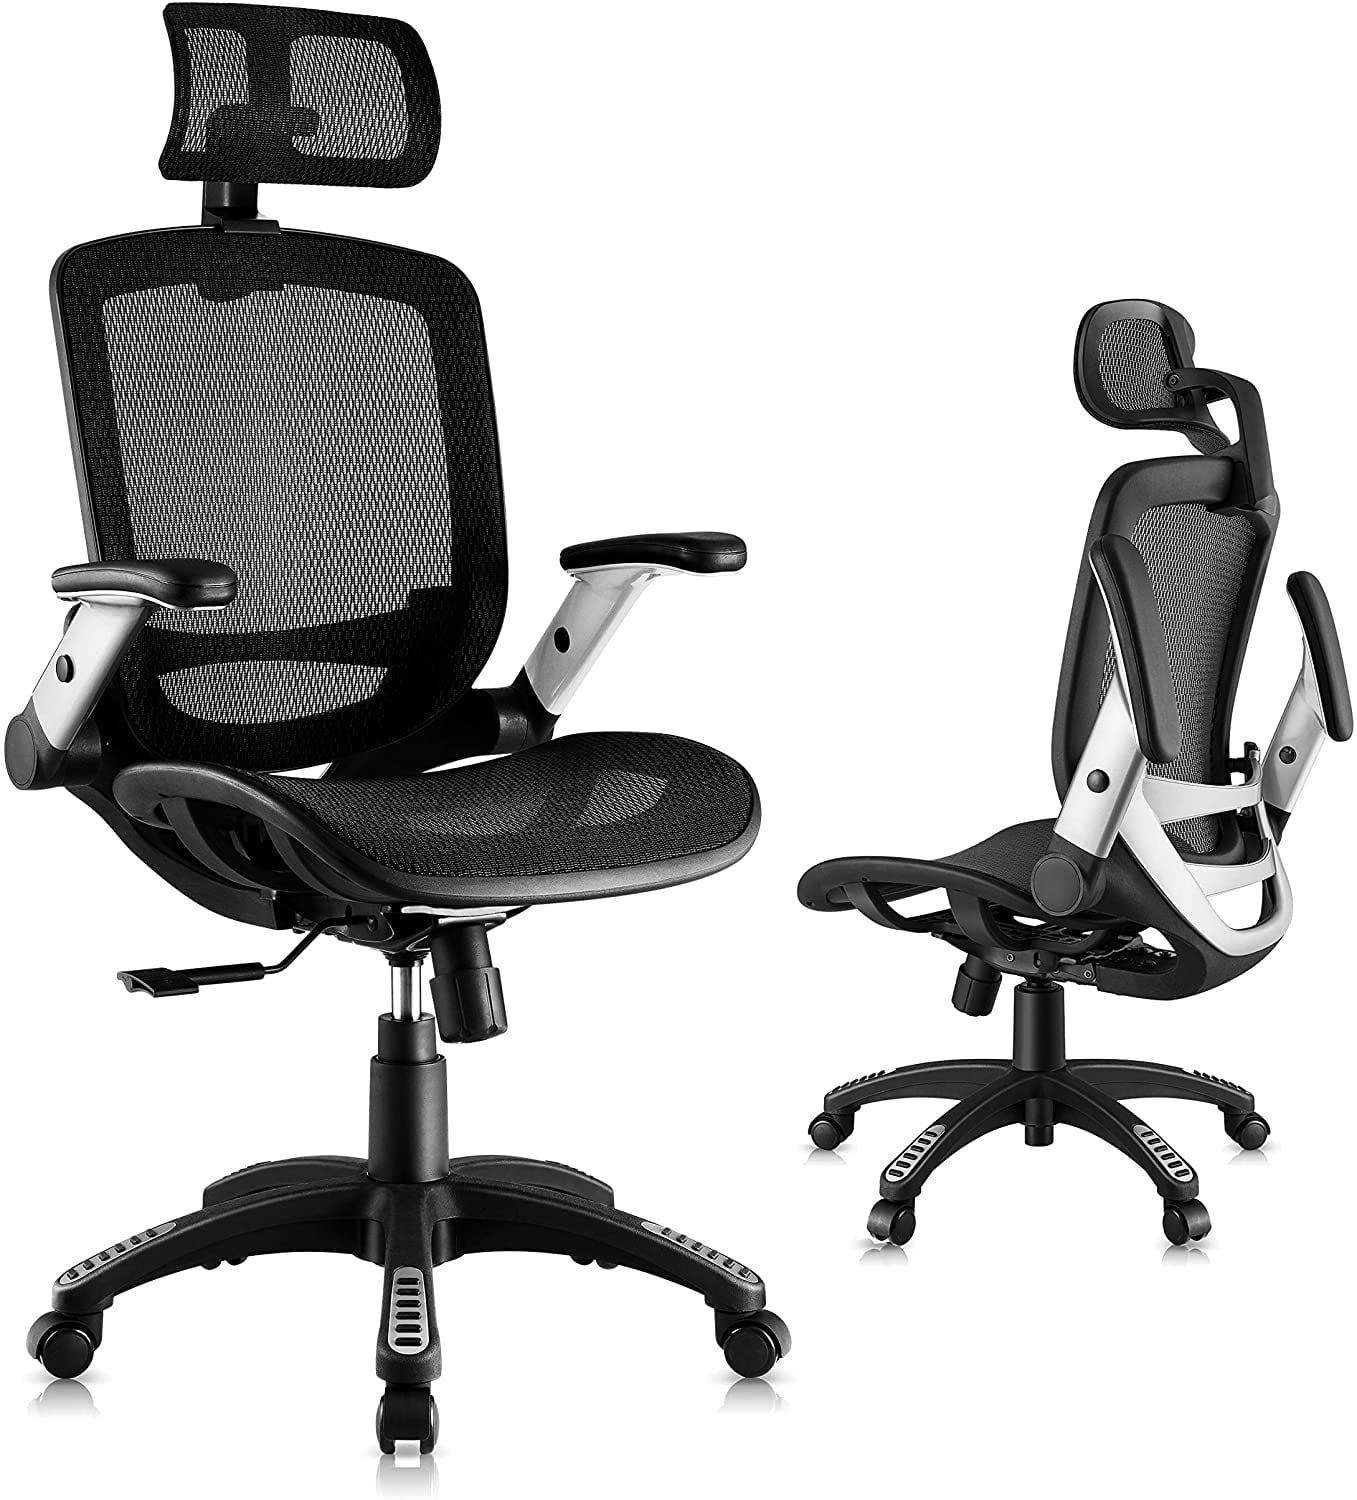 Adjustable Office Chair Back Support Swivel Flip Up Arm Computer Desk Task Chair 